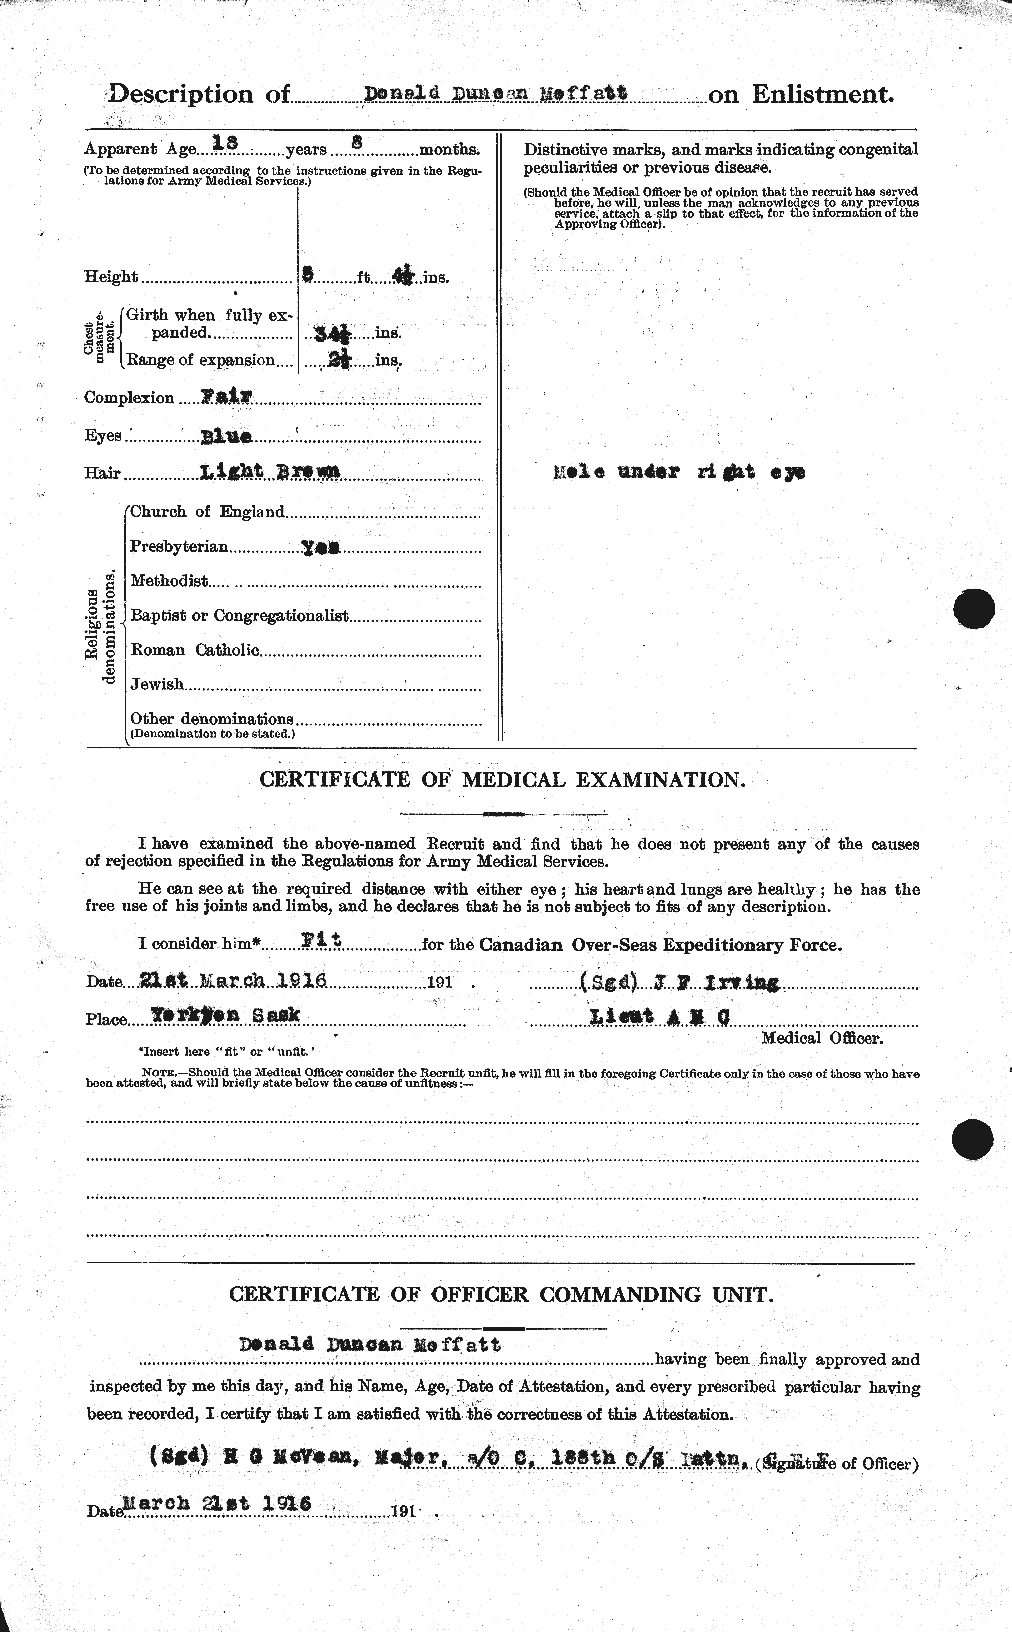 Personnel Records of the First World War - CEF 499004b